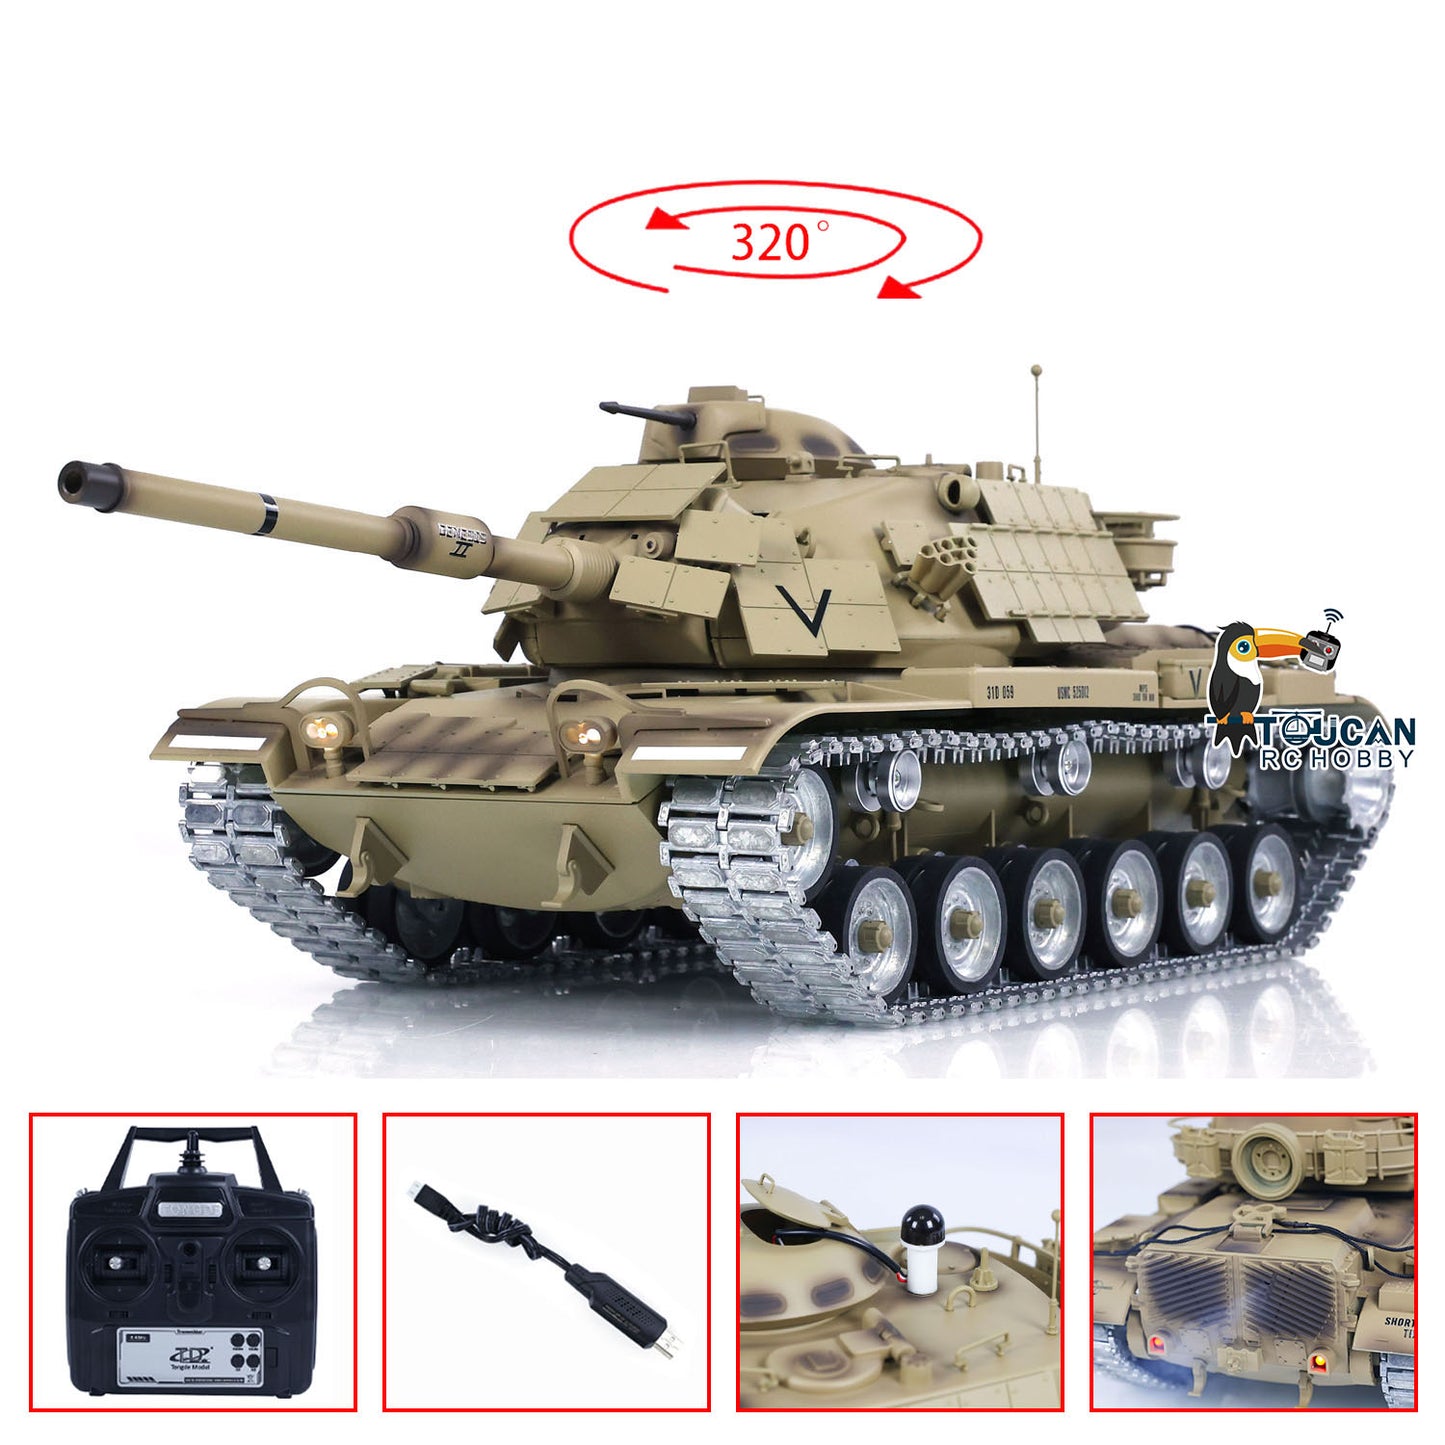 IN STOCK Tongde Model 1/16 RC Battle Tank M60A1 ERA USA Remote Control Armored Vehicle Panzer Hobby Model Sound Painted Assembled